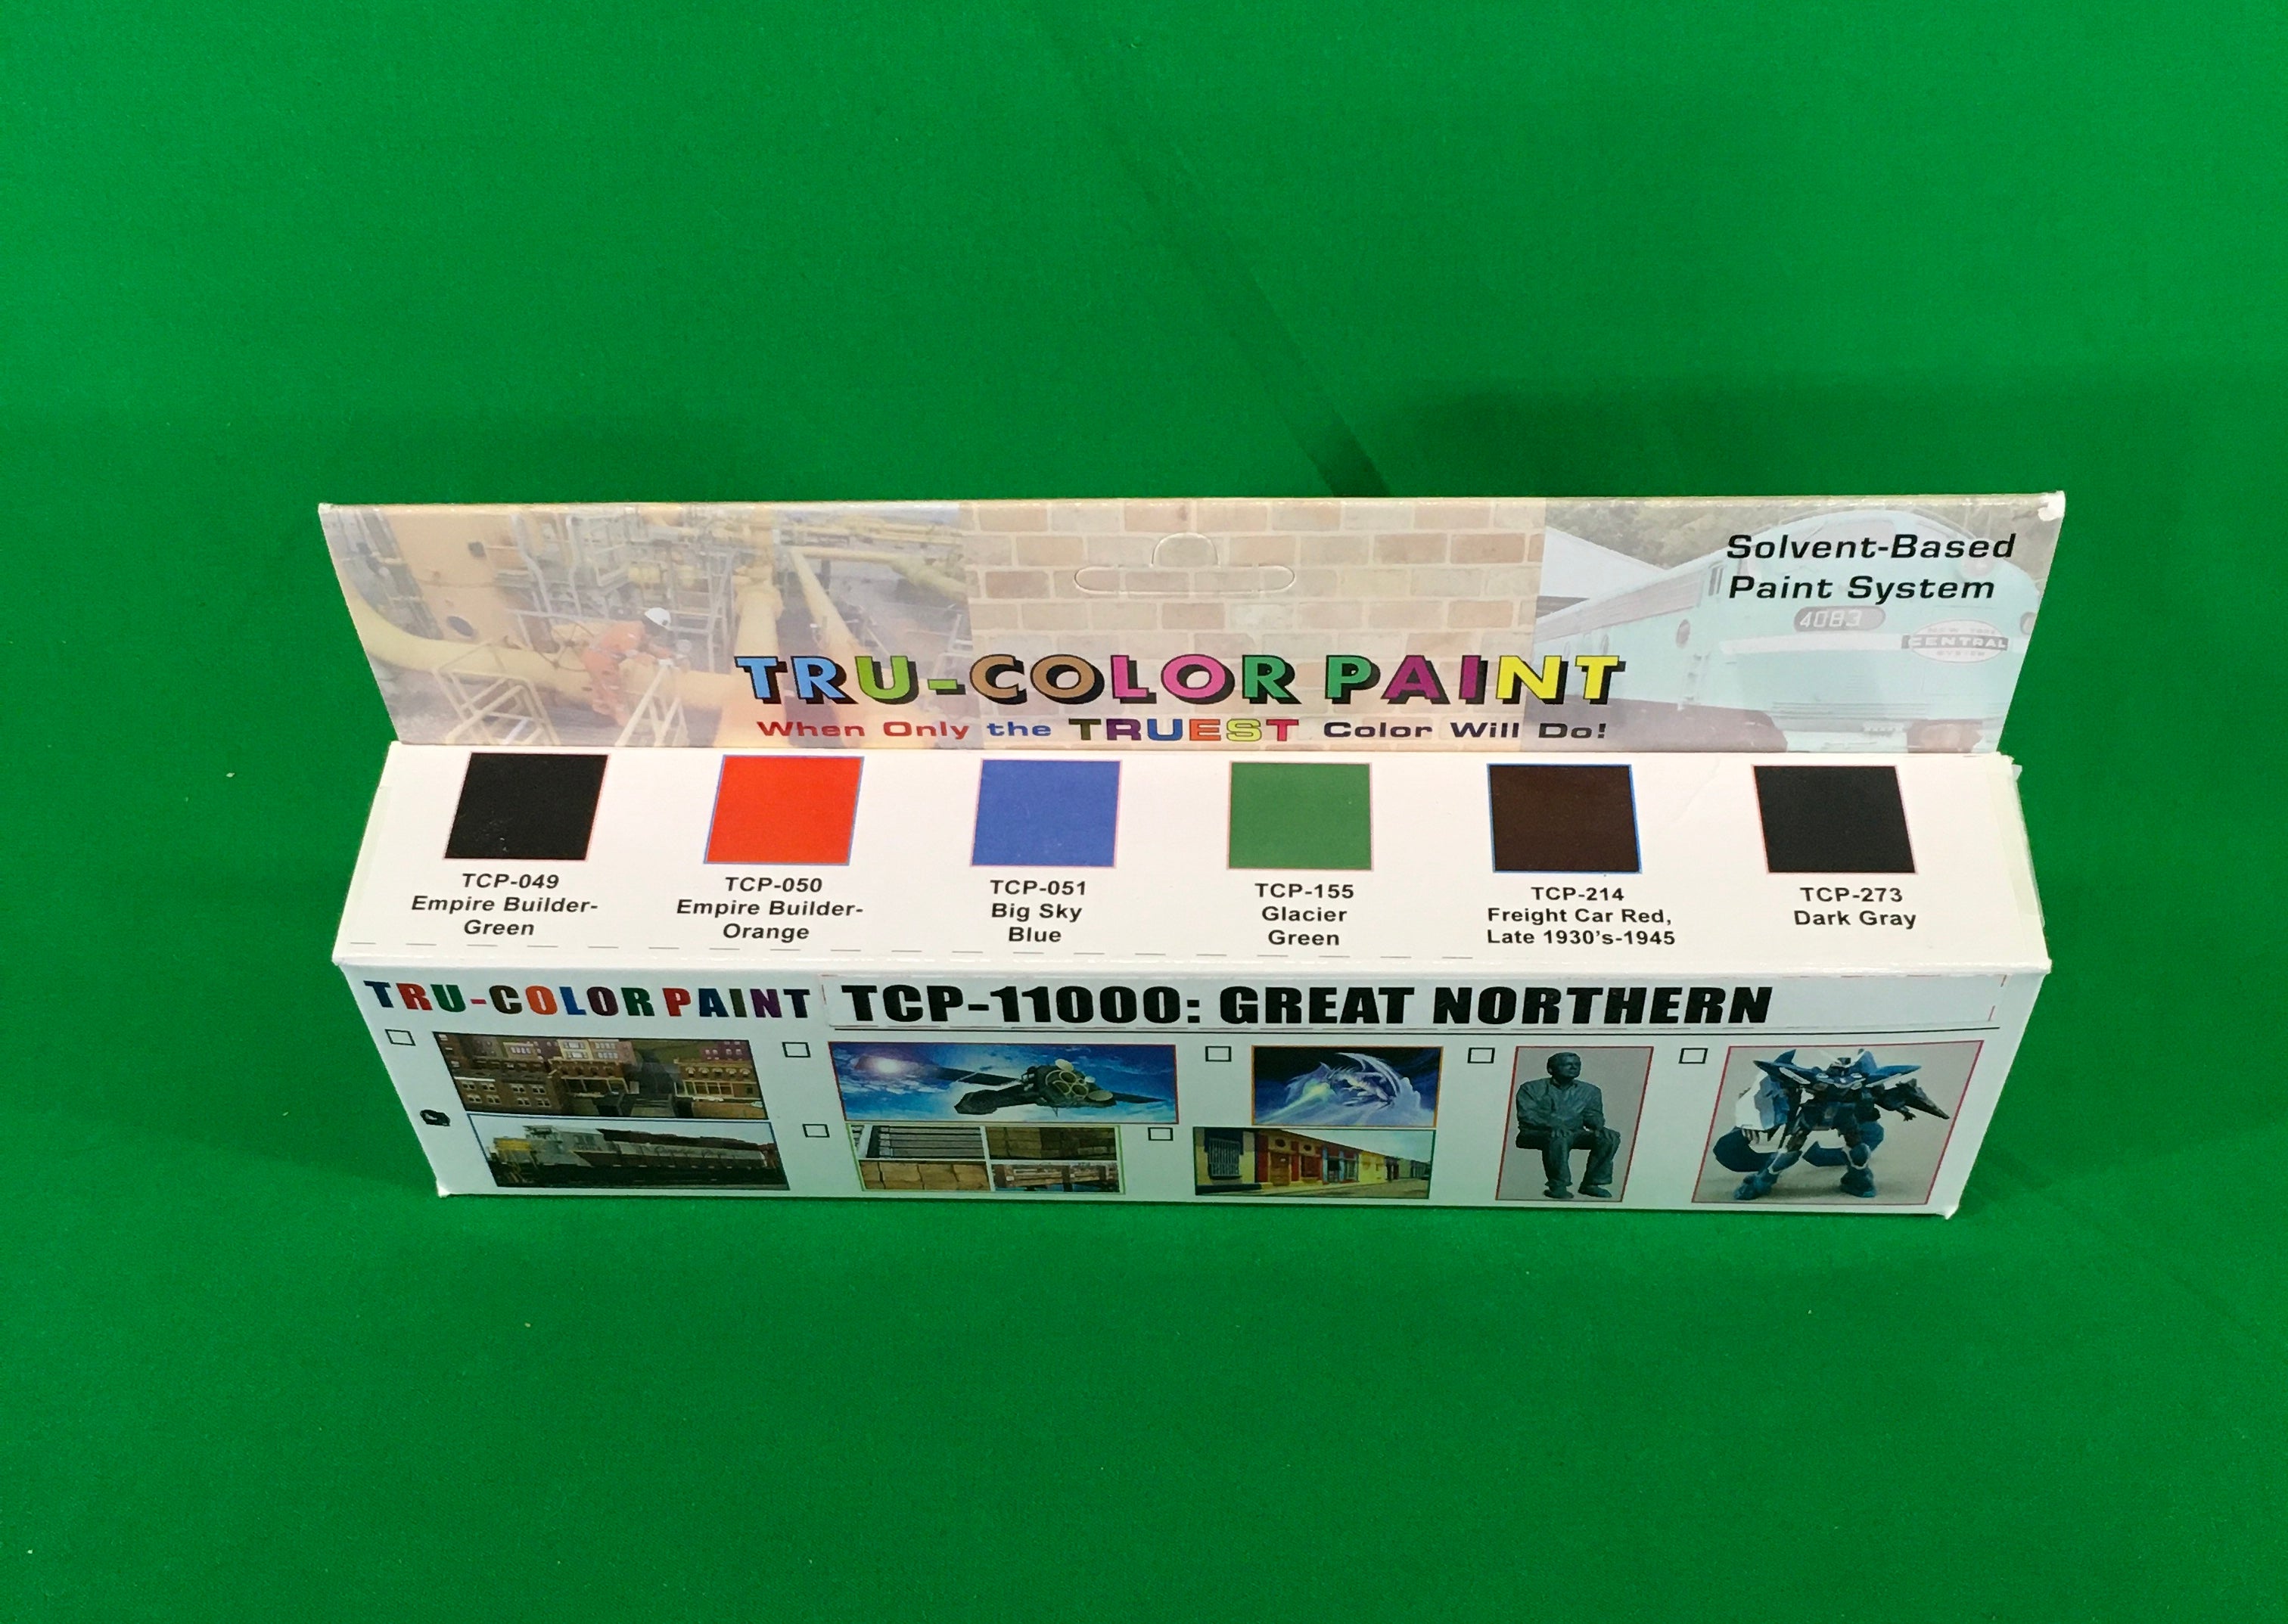 Tru-Color Paint - TCP-11000 - Great Northern Set (Solvent-Based Paint)